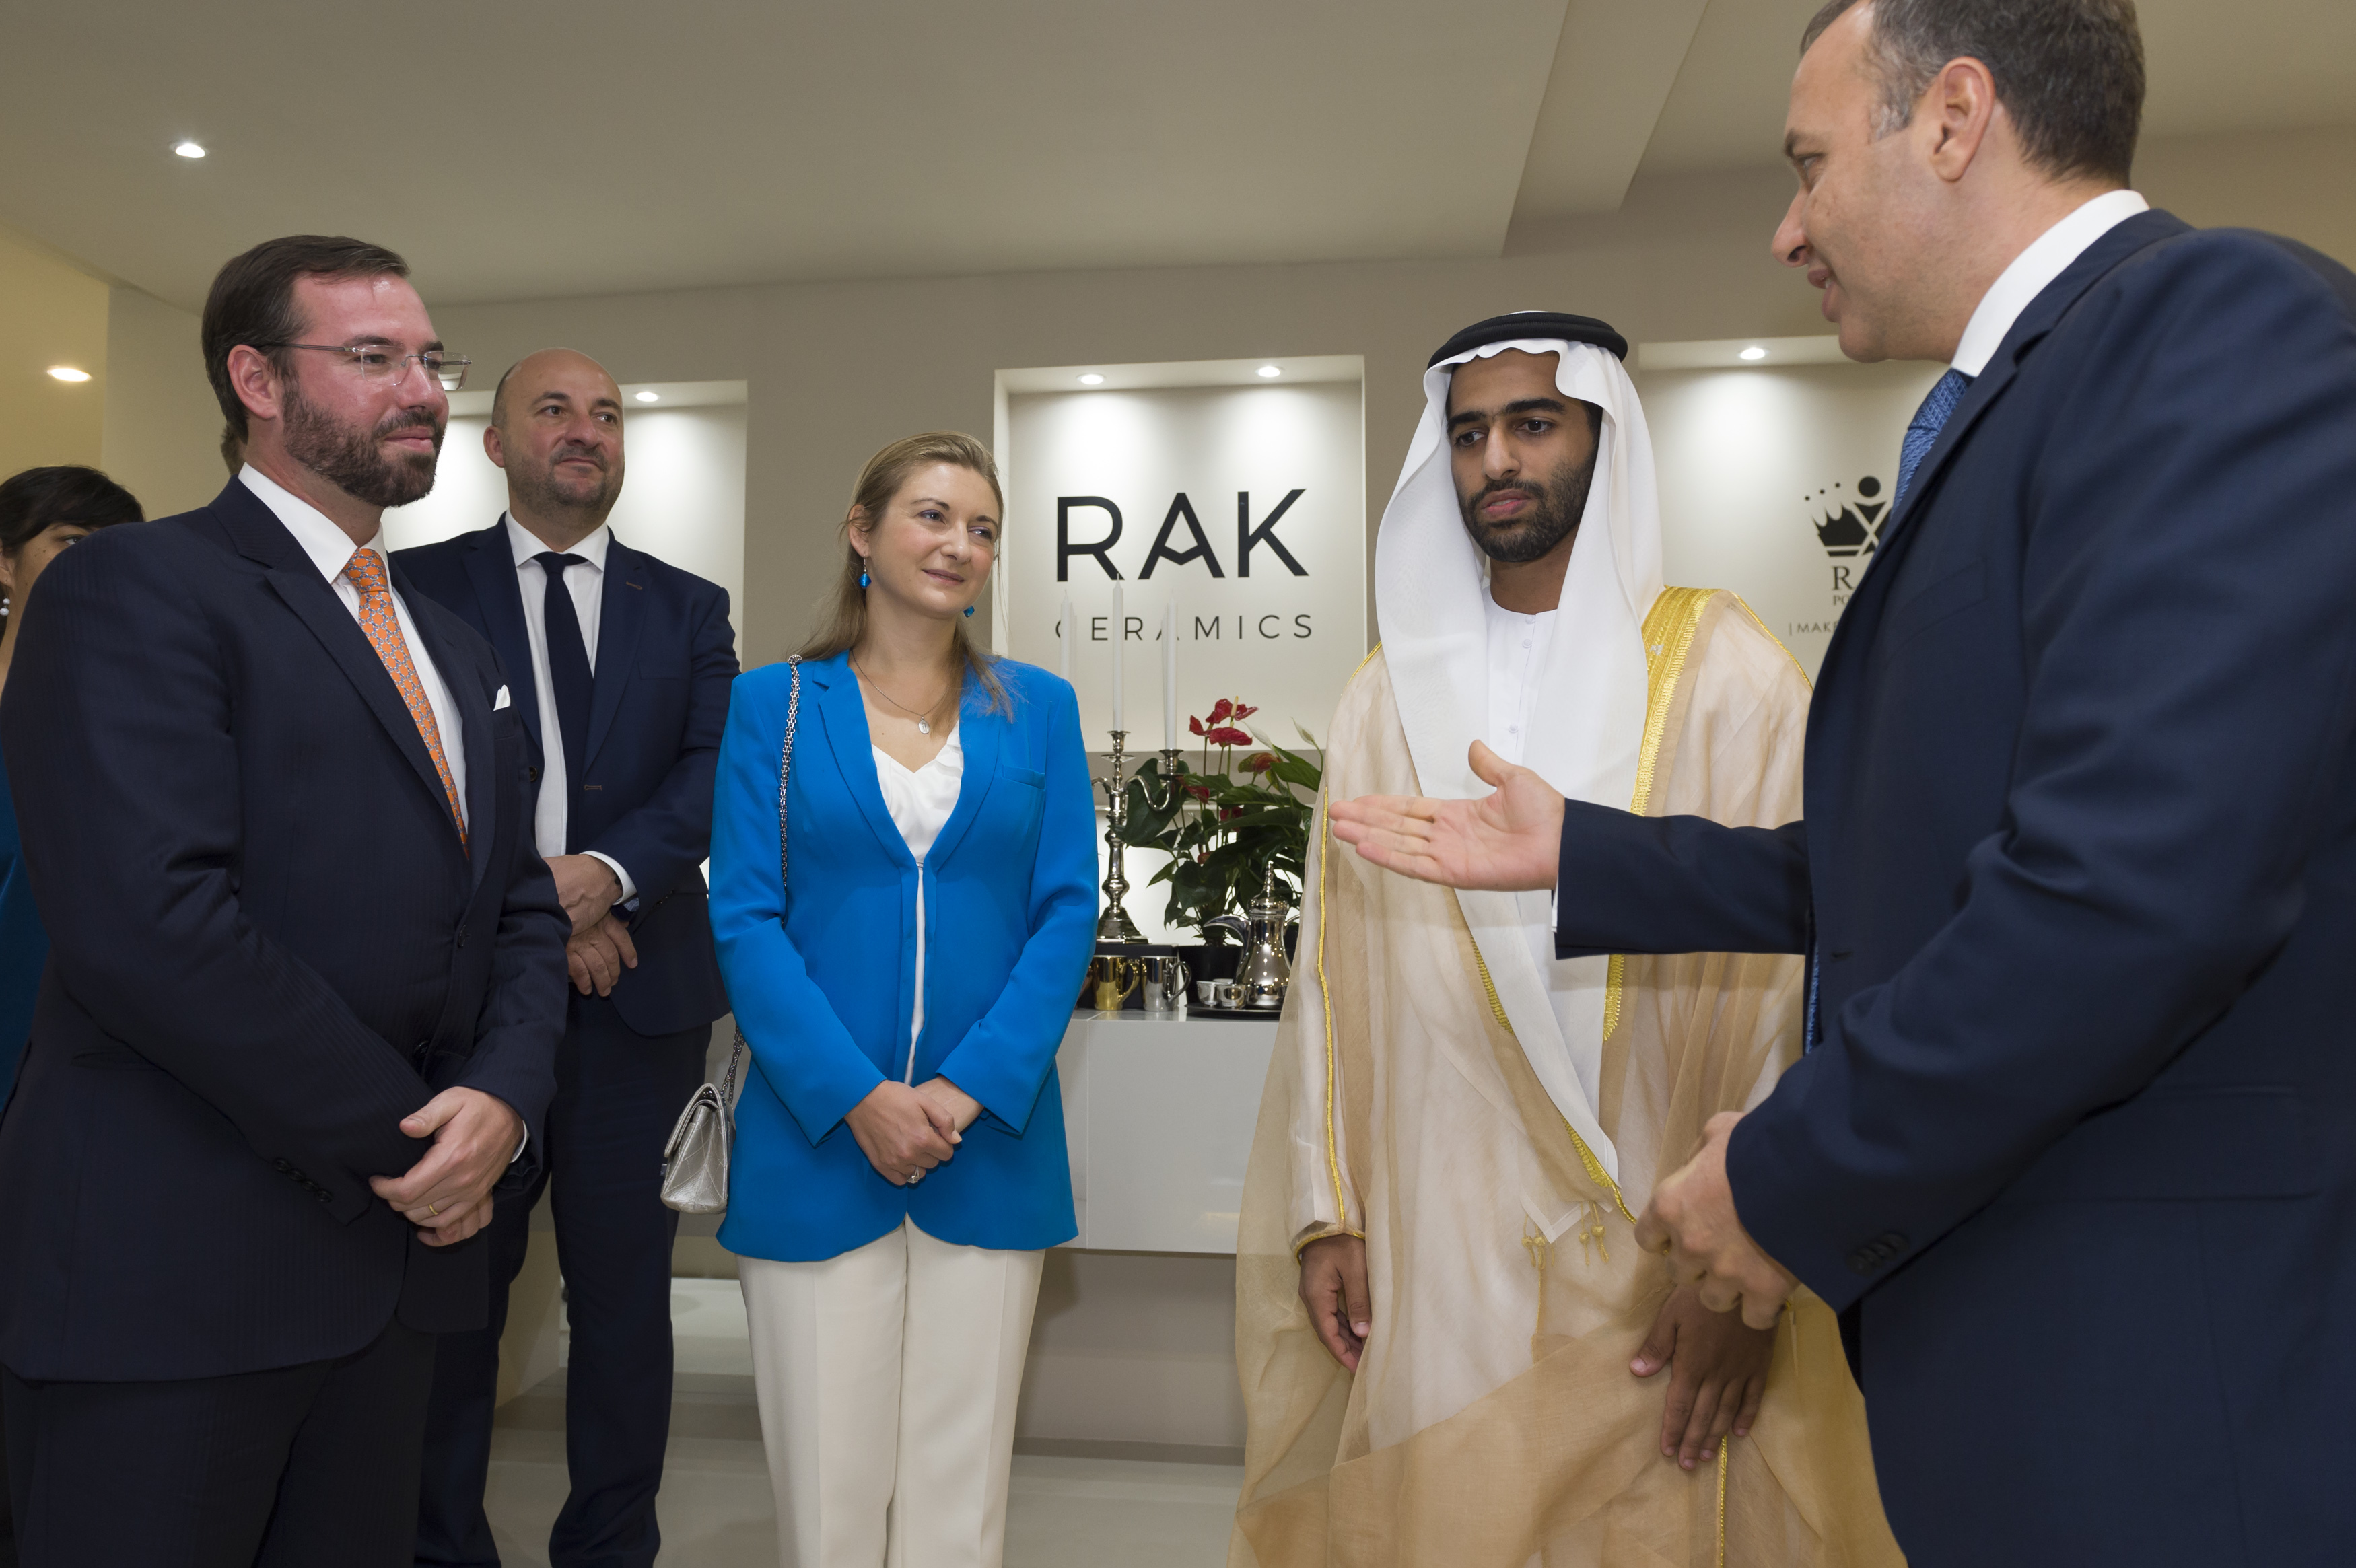 RAK Ceramics Welcomes HRH Prince Guillaume of Luxembourg